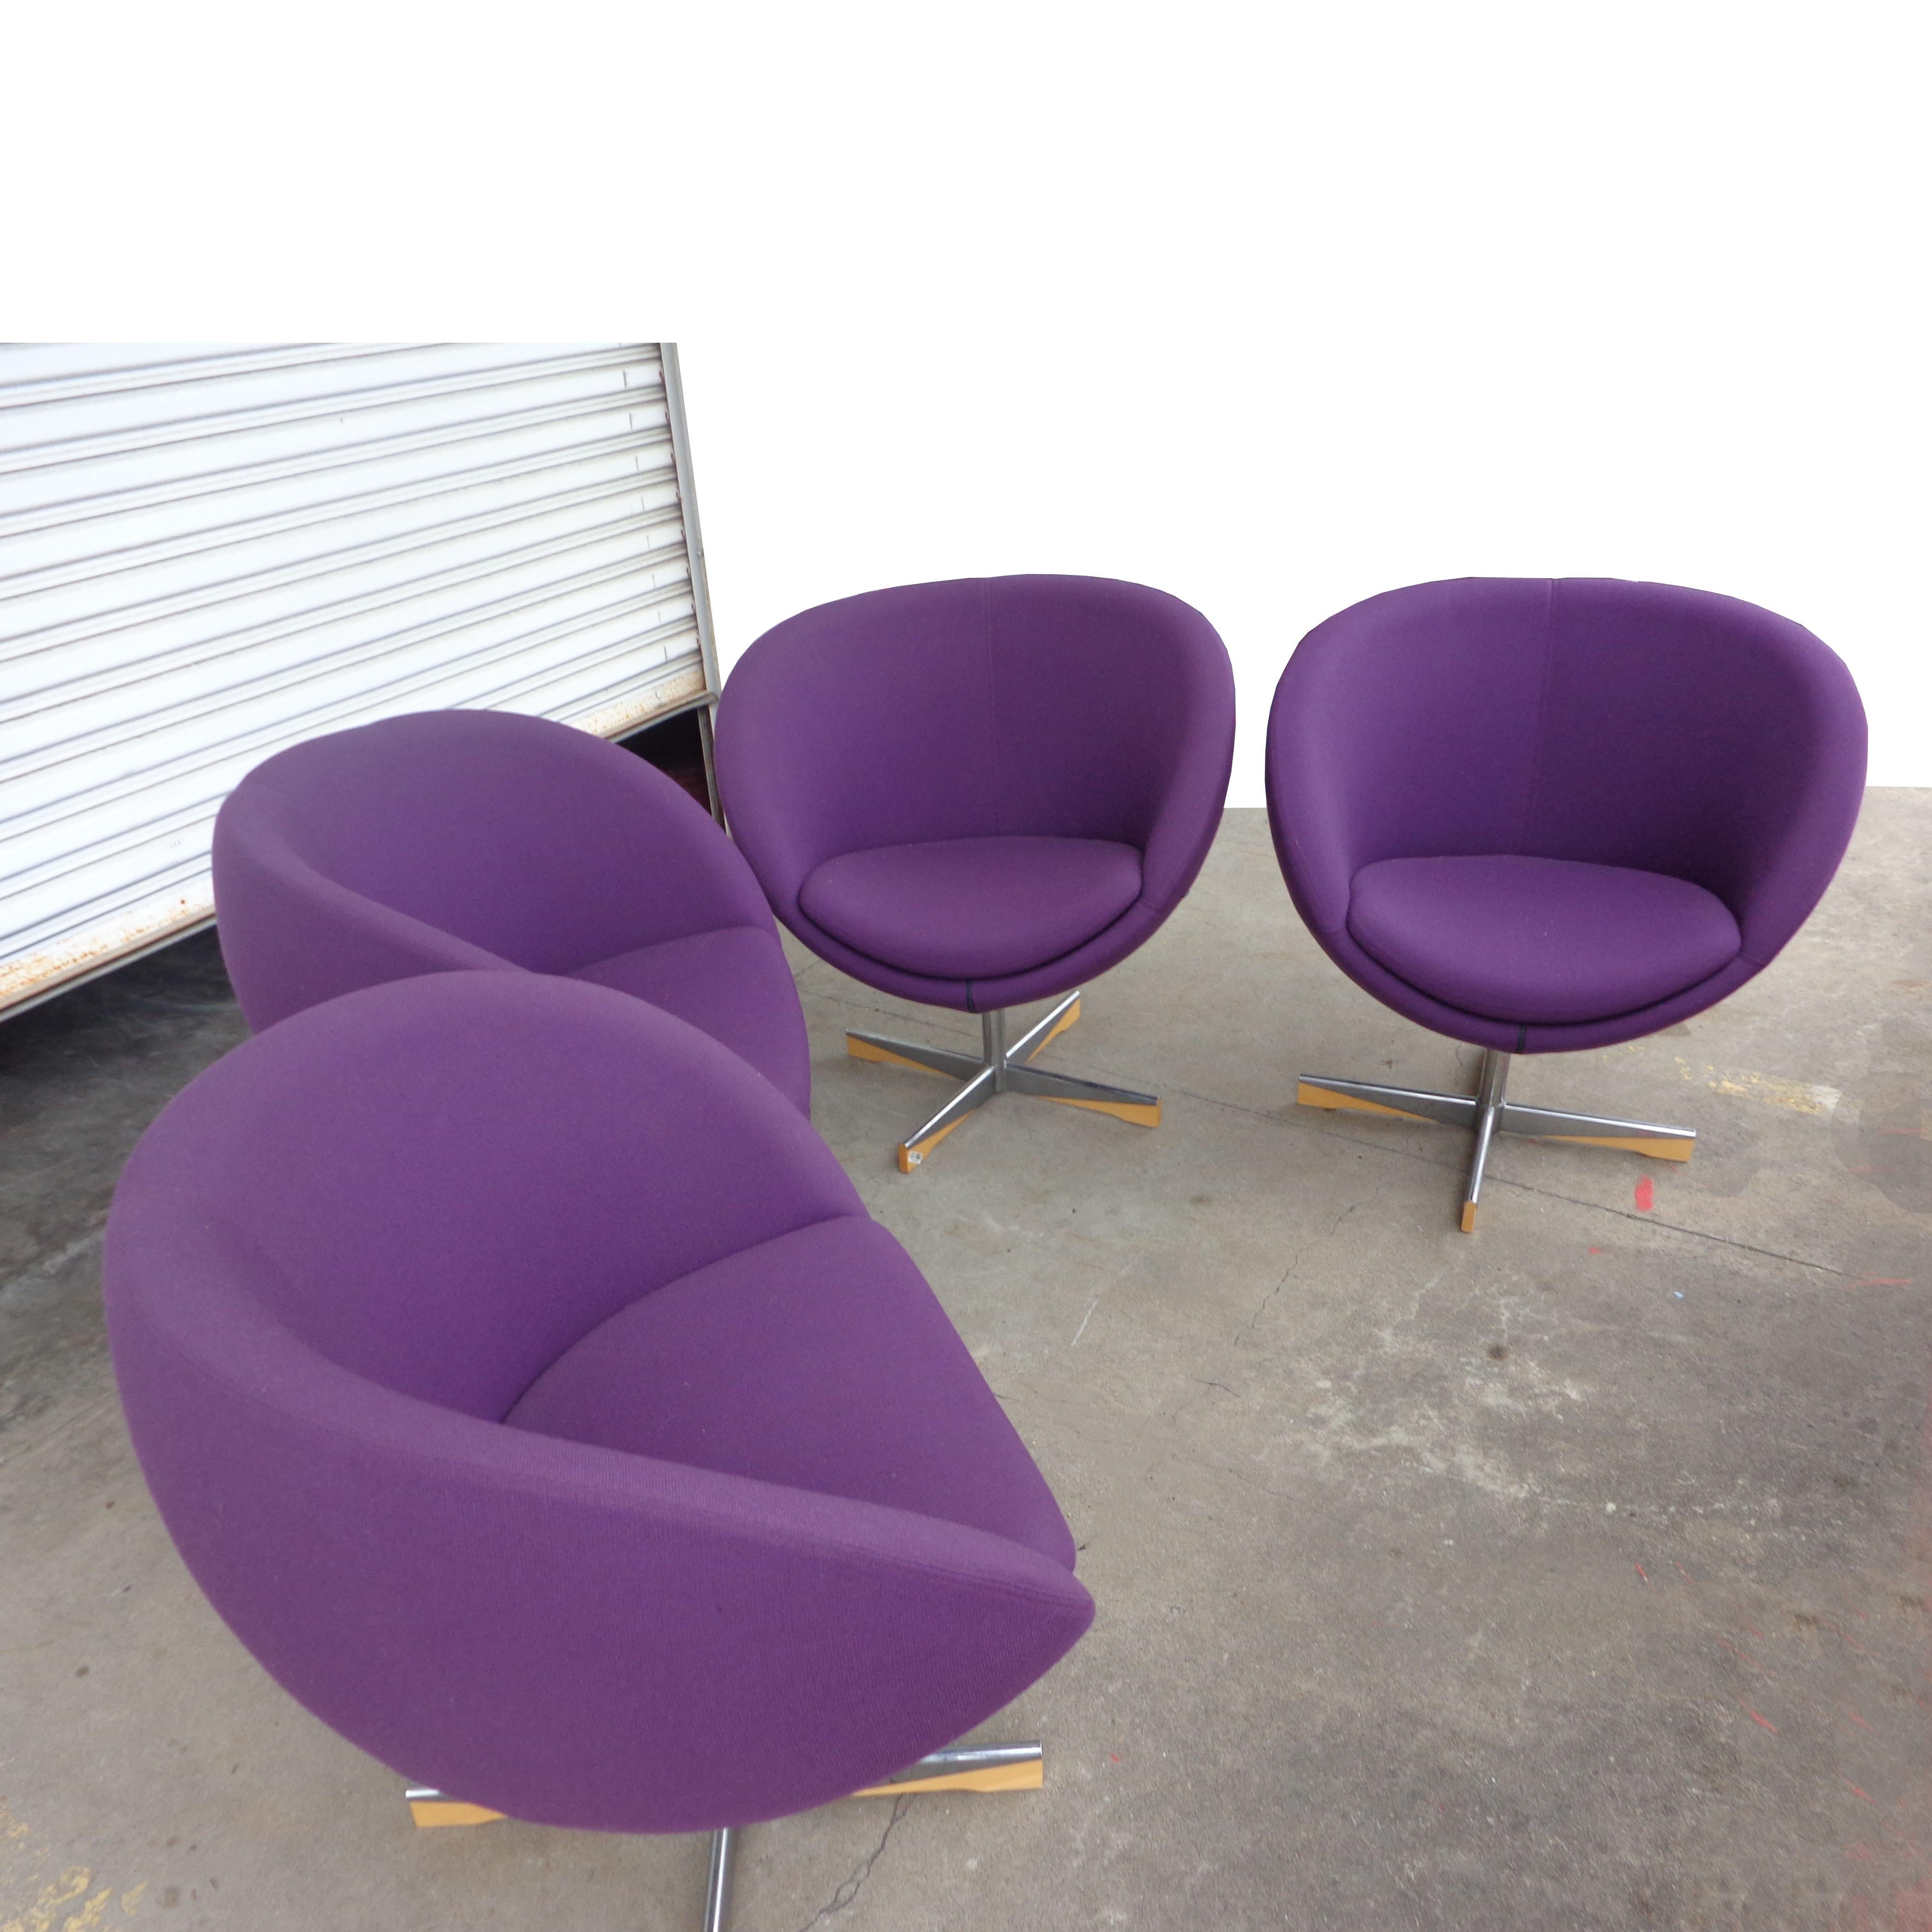 20th Century 1 1960s Planet Chair by Sven Ivar Dysthe for Fora Form For Sale